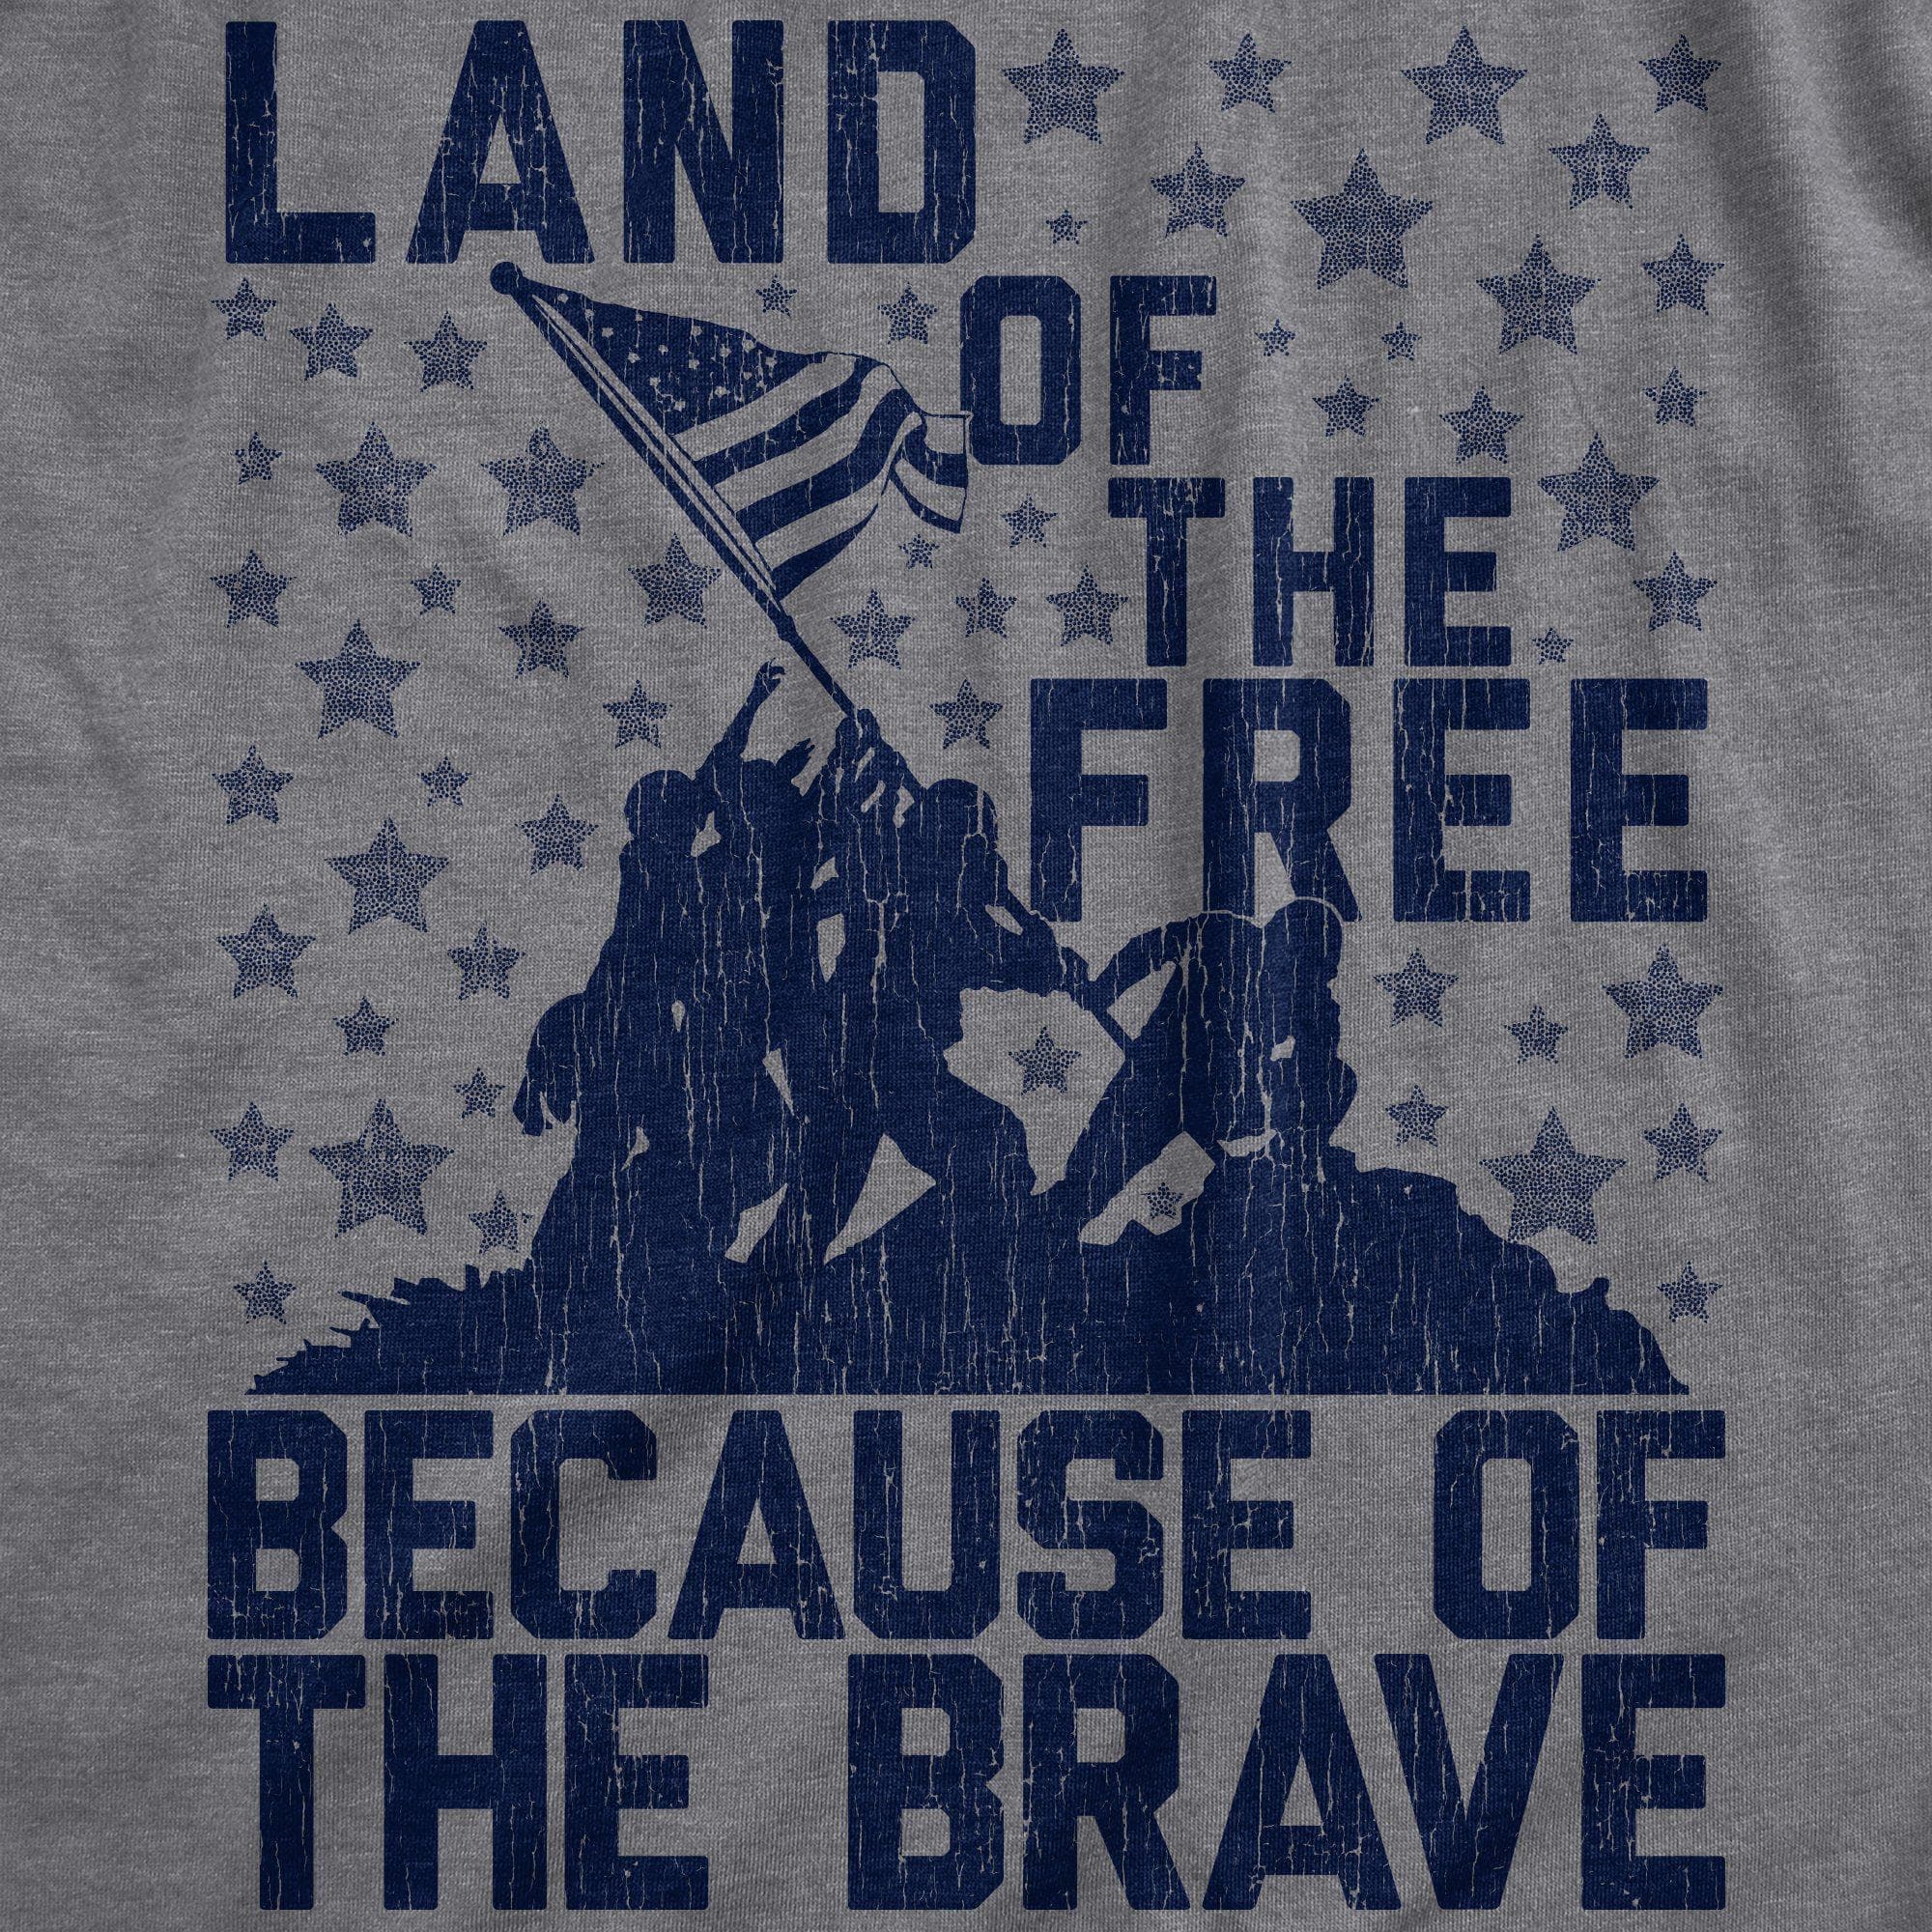 Land Of The Free Because Of The Brave Women's Tshirt - Crazy Dog T-Shirts